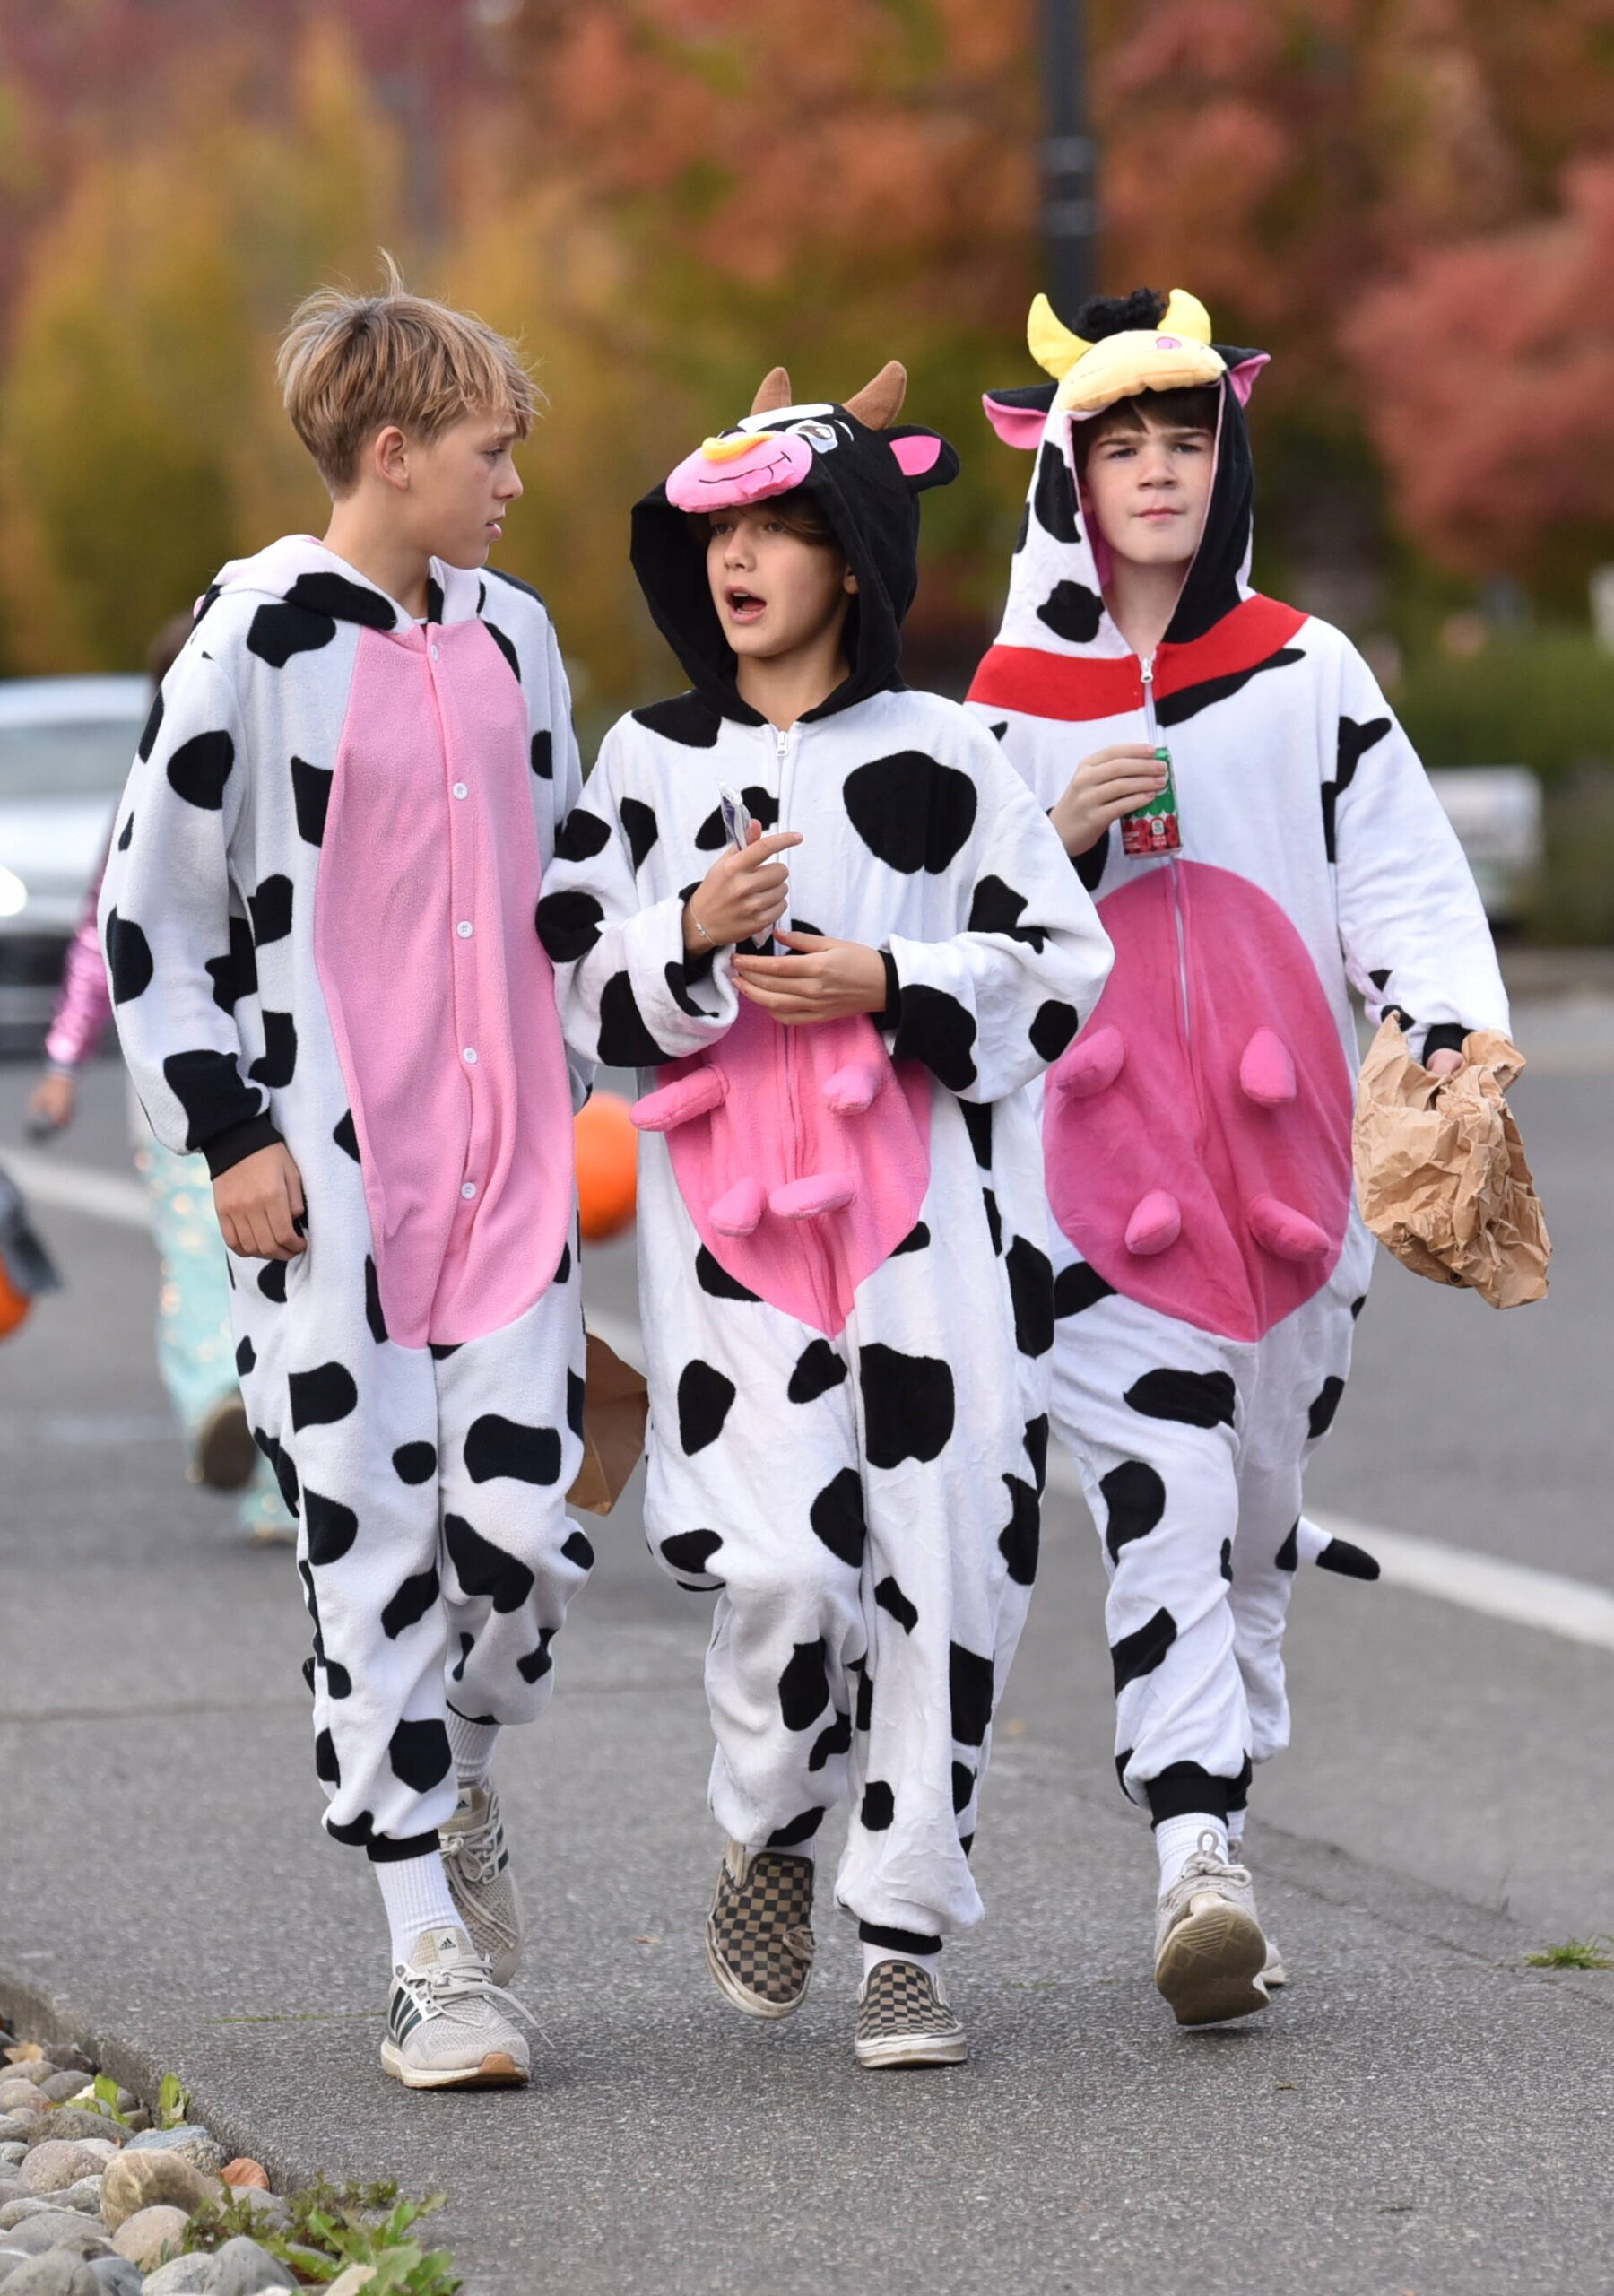 Three cows spotted on Madison Avenue are utterly frightening as they make their way to Winslow Way for trick or treating.